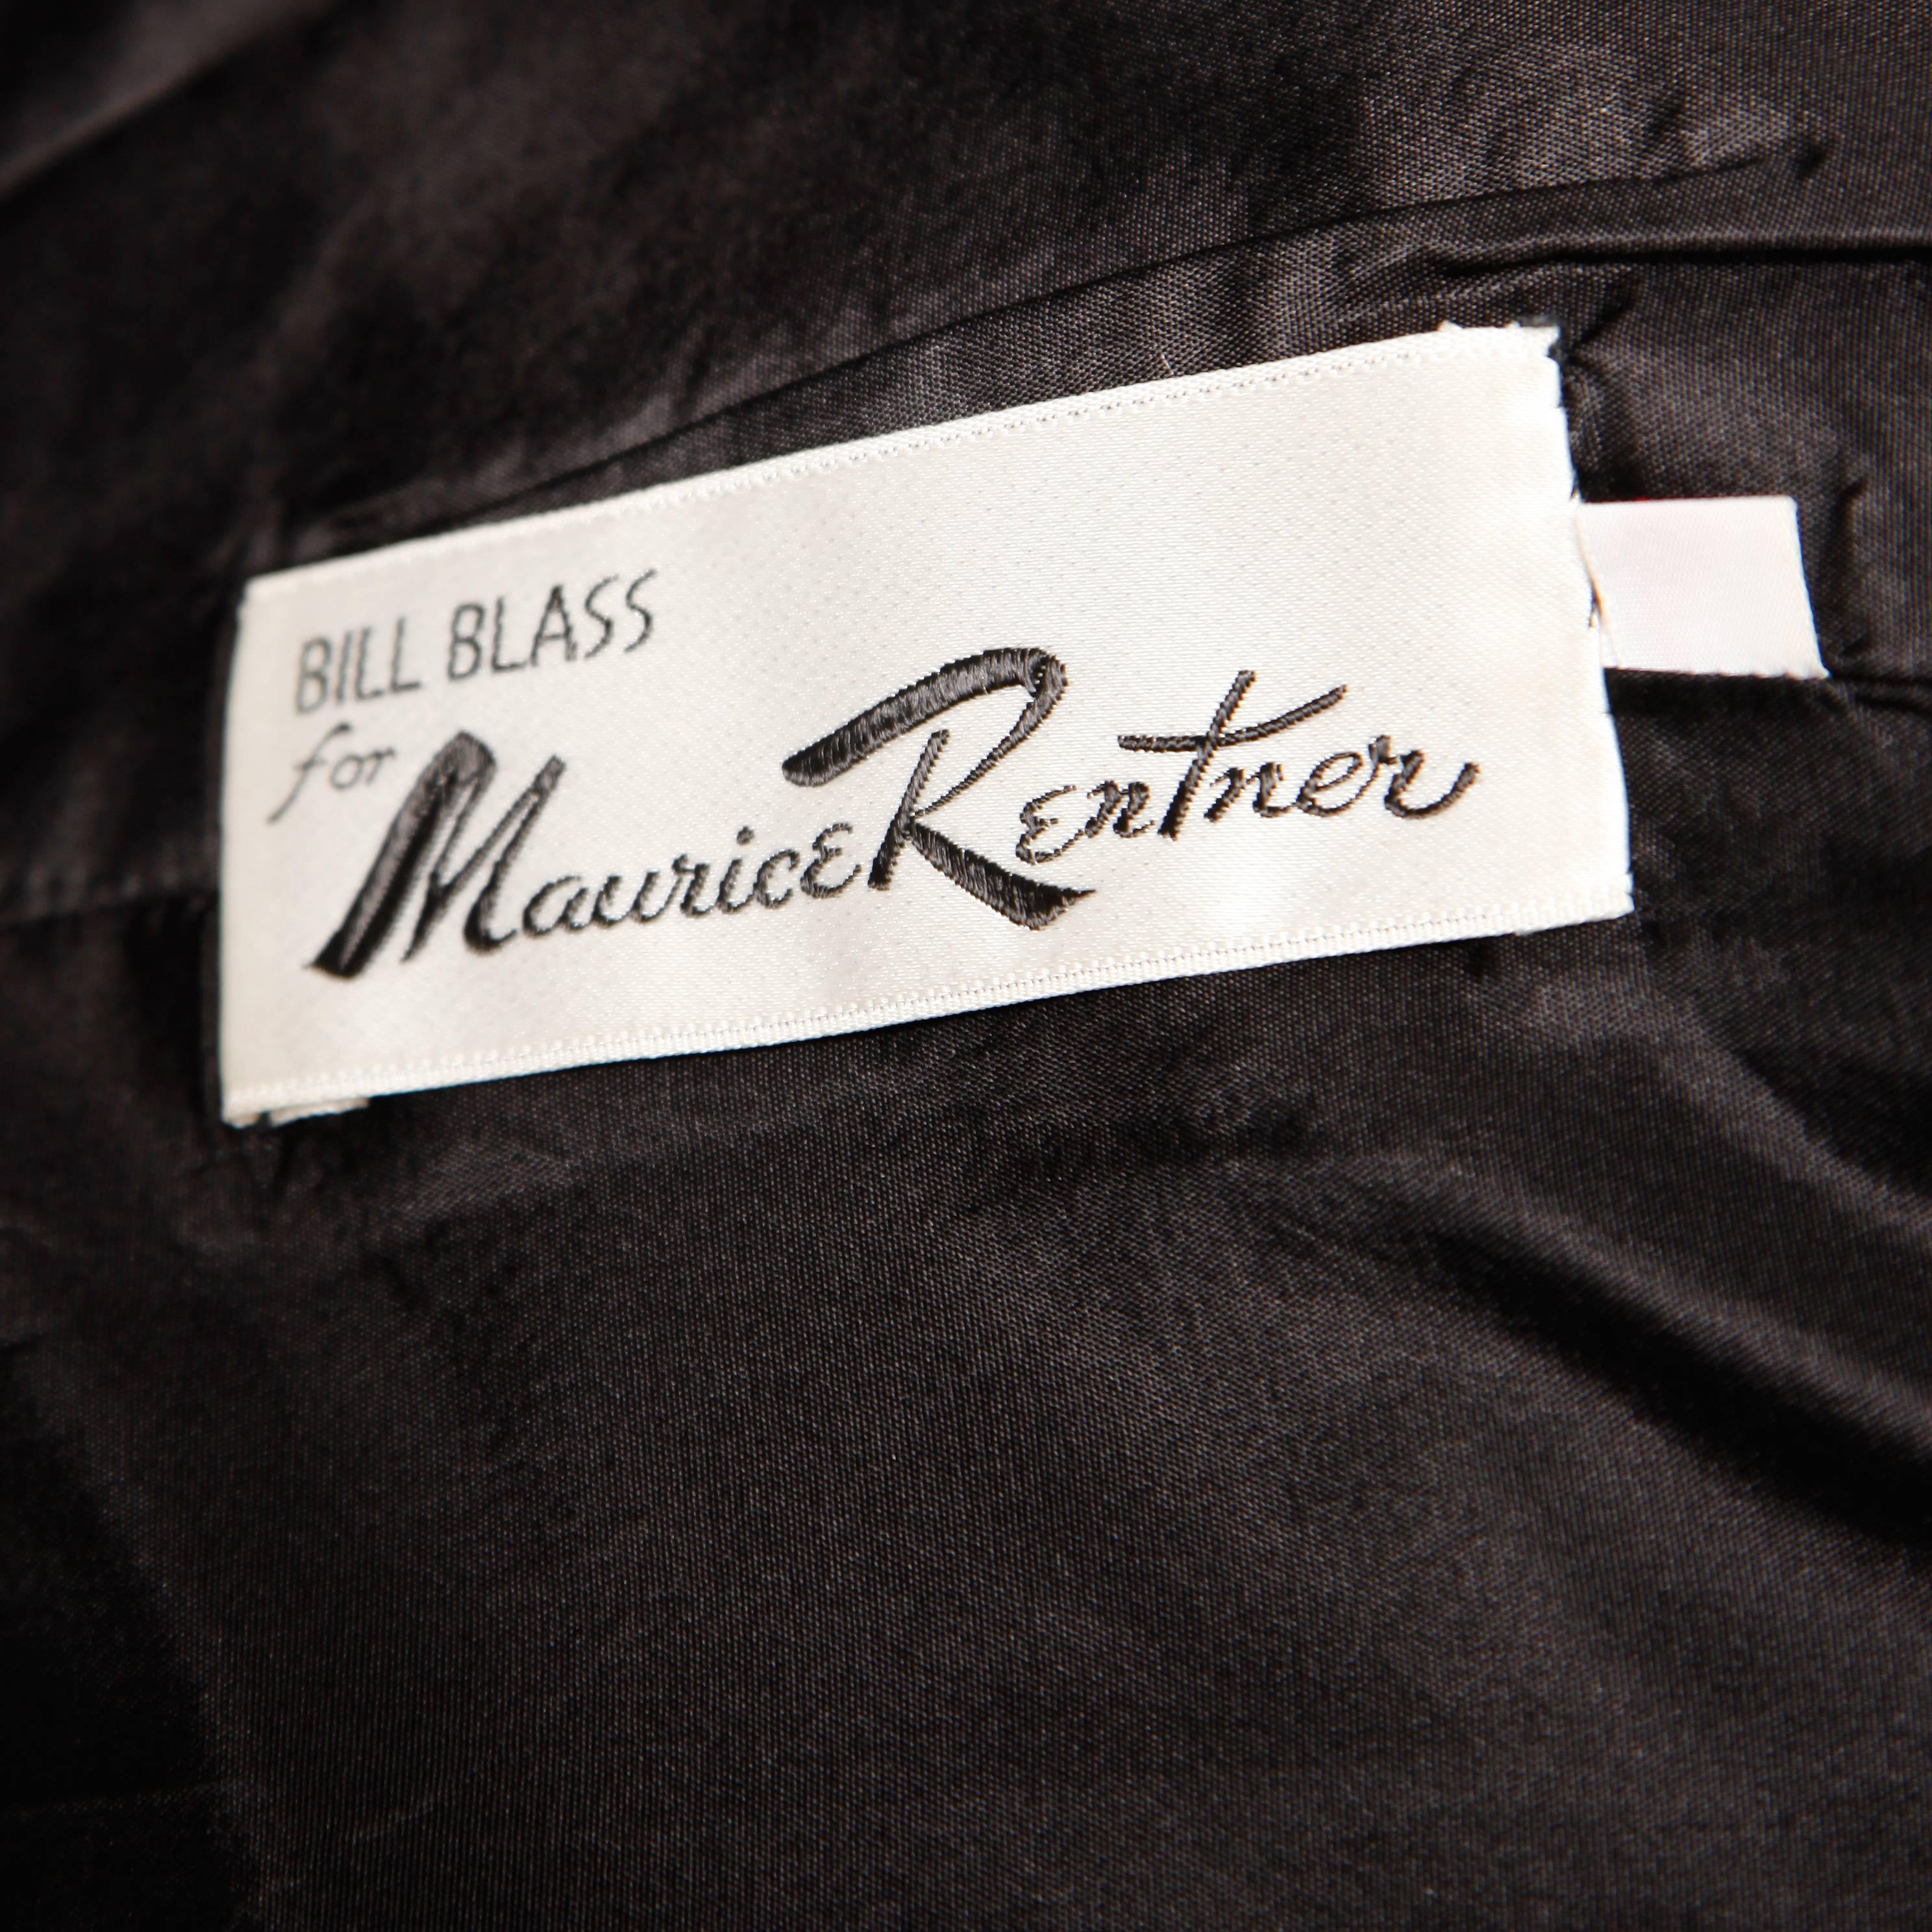 Vintage 1960s wool blazer jacket by Bill Blass for Maurice Rentner.

Details: 

Fully Lined
Front Side Pockets
Closure: Button Front/ DBL Breasted
Marked Size: 14
Estimated Size: Medium
Color: Black/ Off White/ Beige
Fabric: Not Marked/